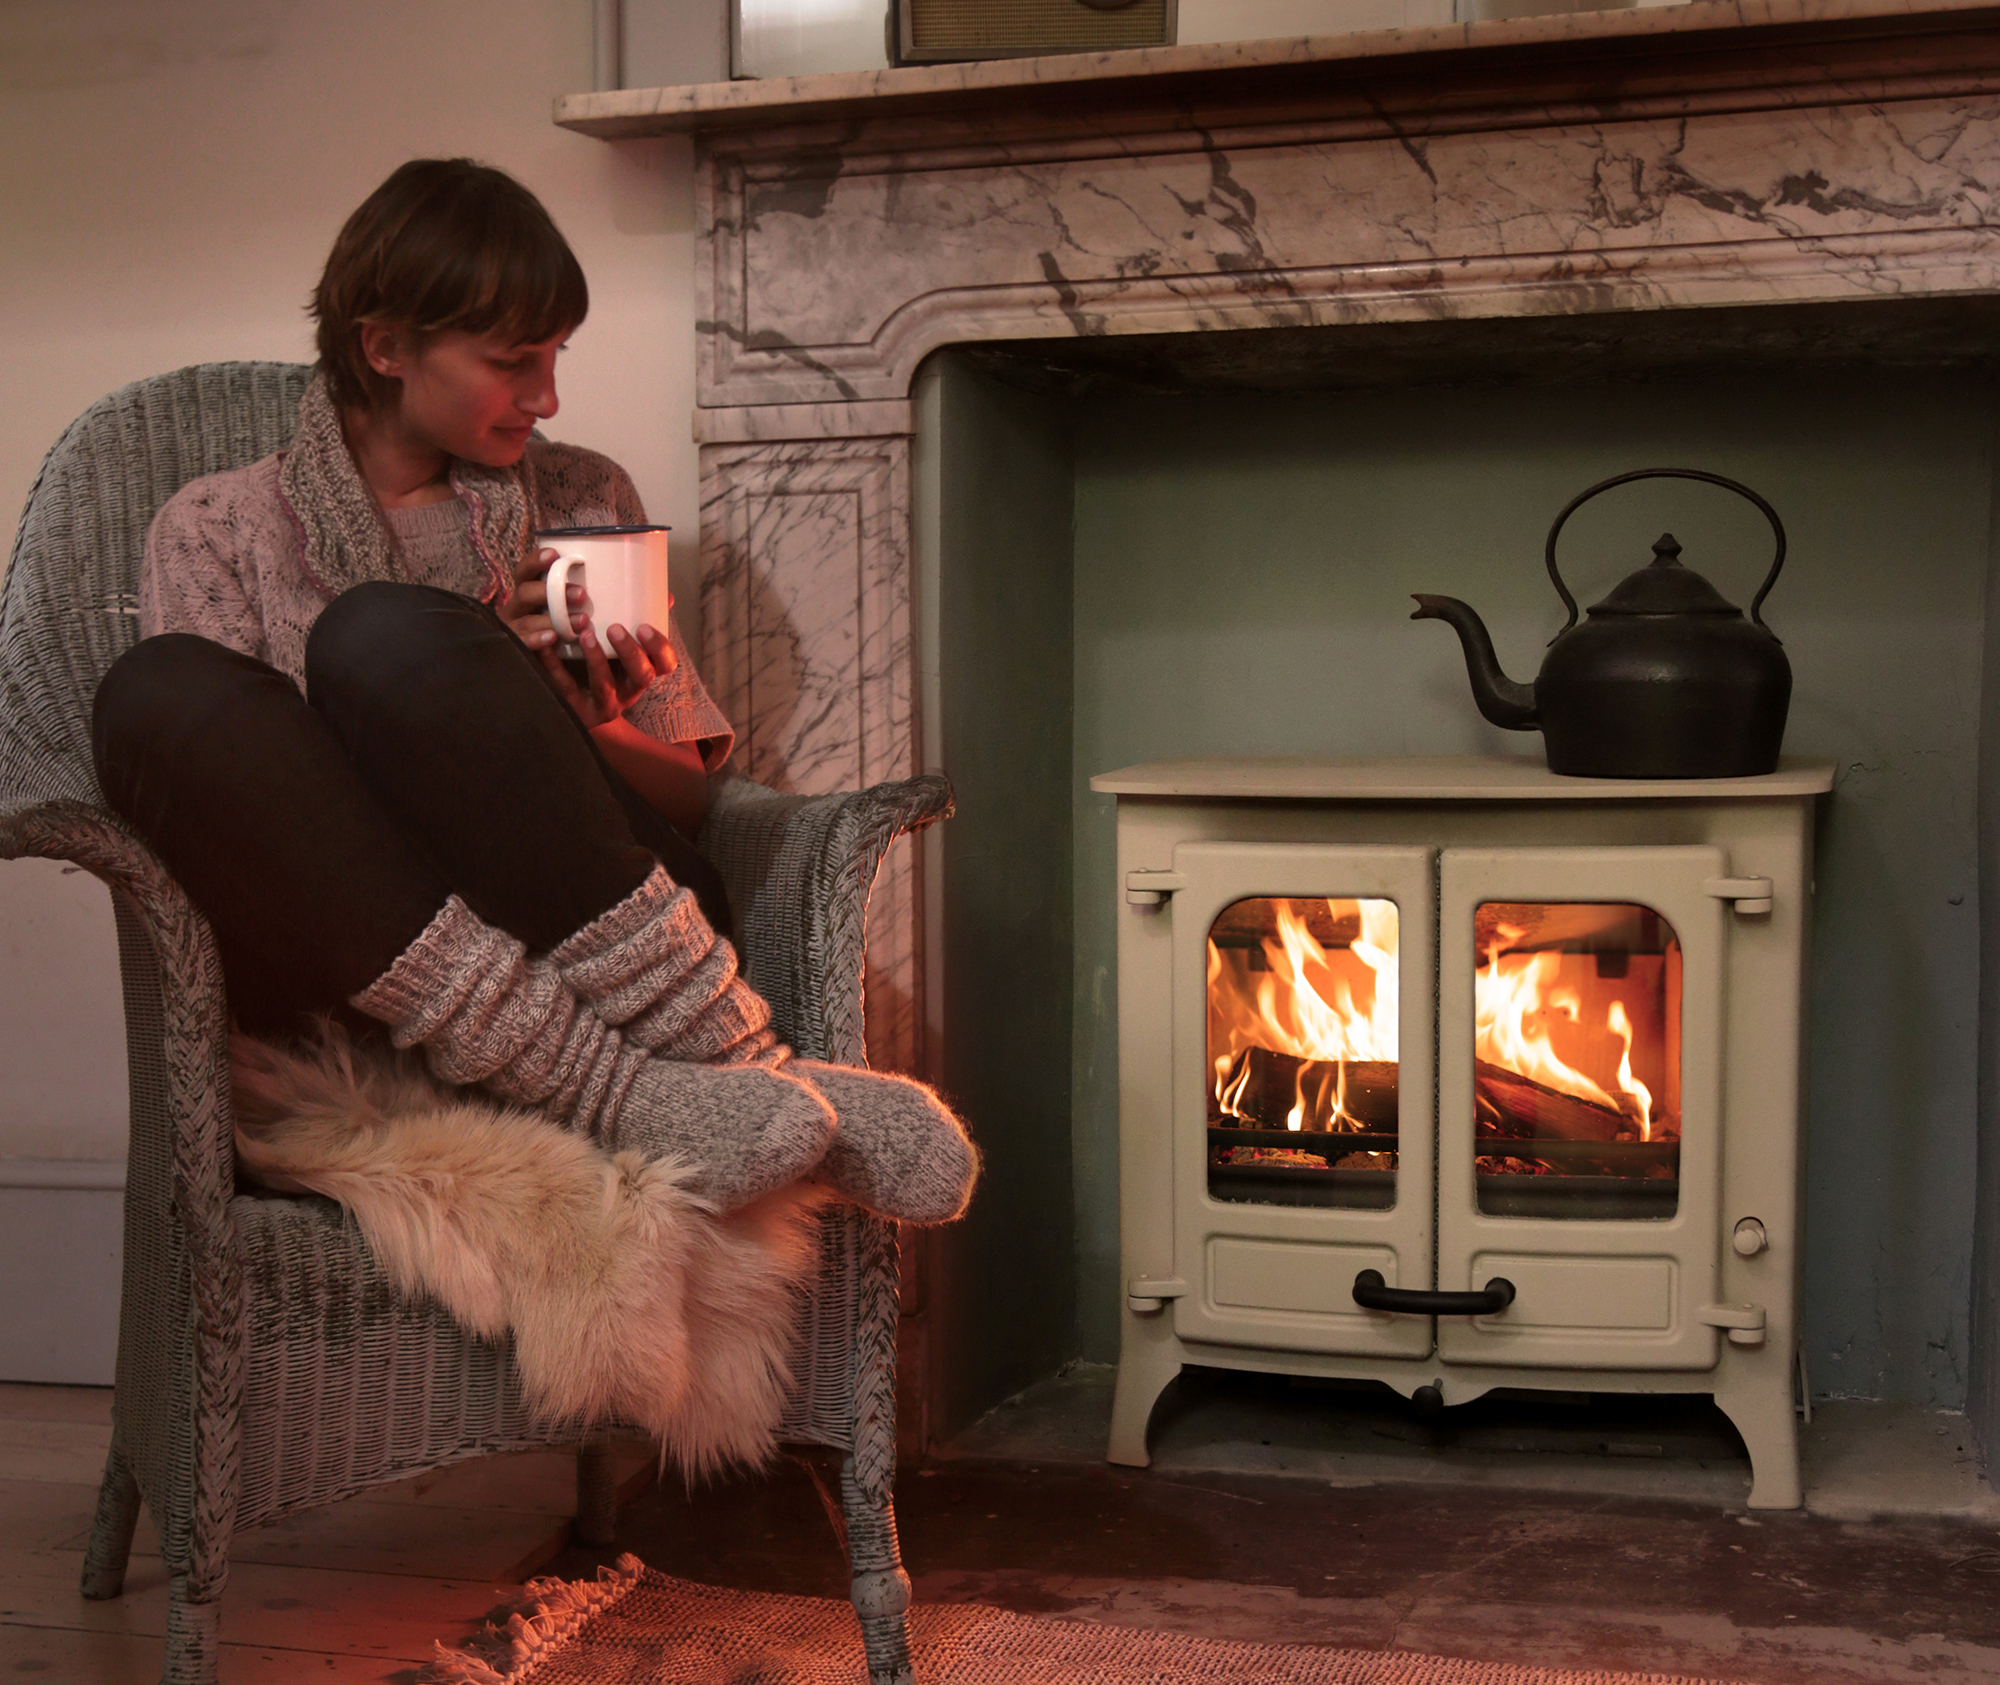 Wood Burning Stoves Must Be Regulated Now